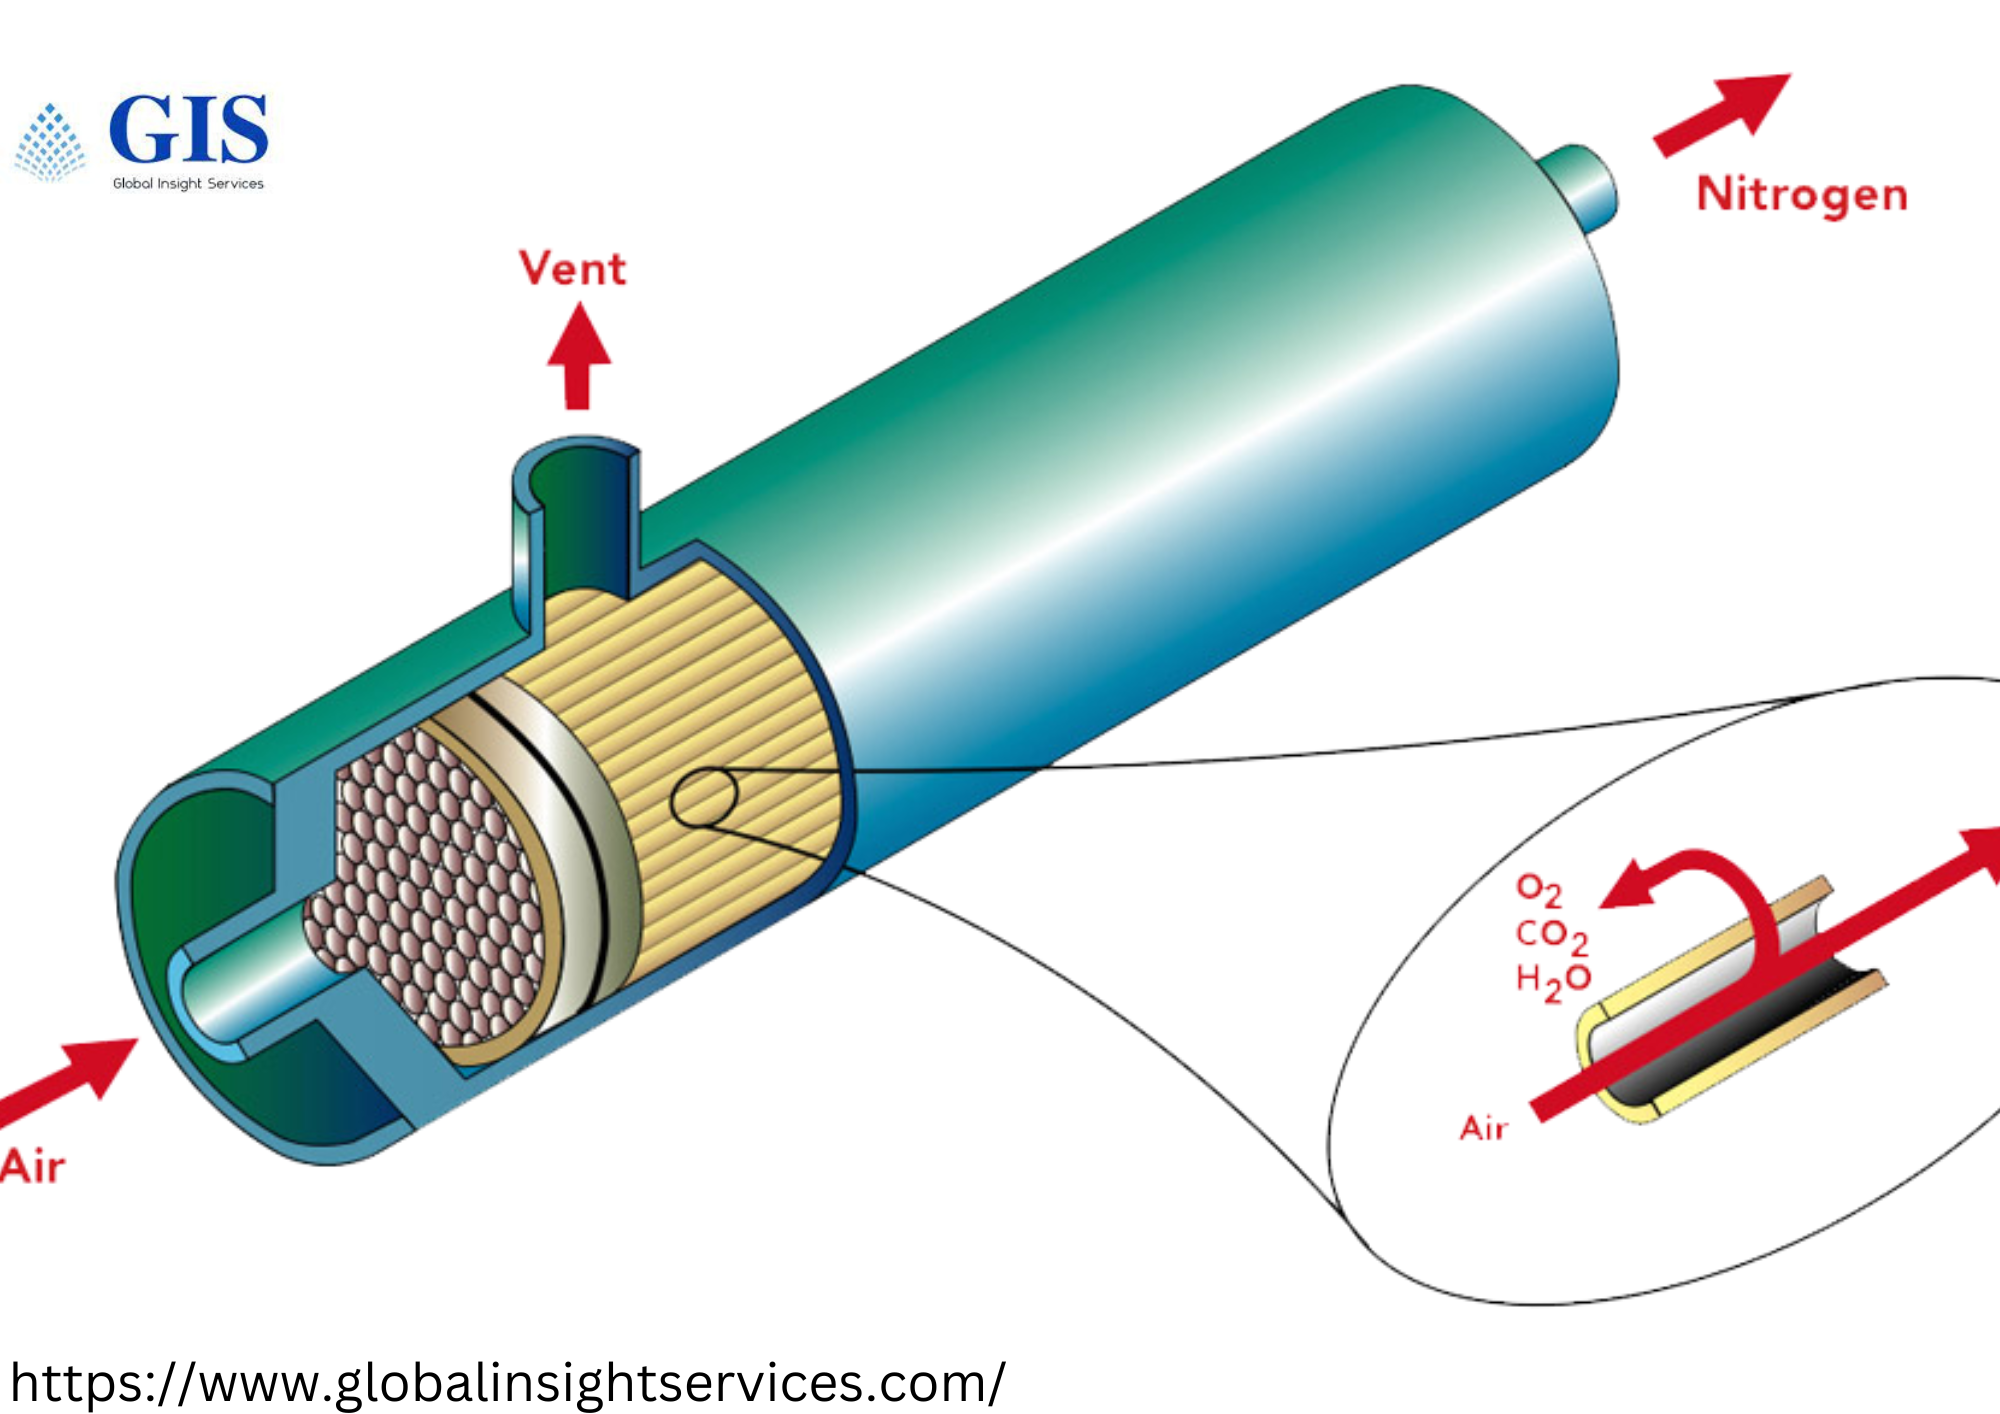 Growth Trajectory of the Gas Separation Membranes Market: USD 1.7 Billion in 2022 to USD 2.9 Billion in 2033 at 5.3% CAGR from 2023 to 2033